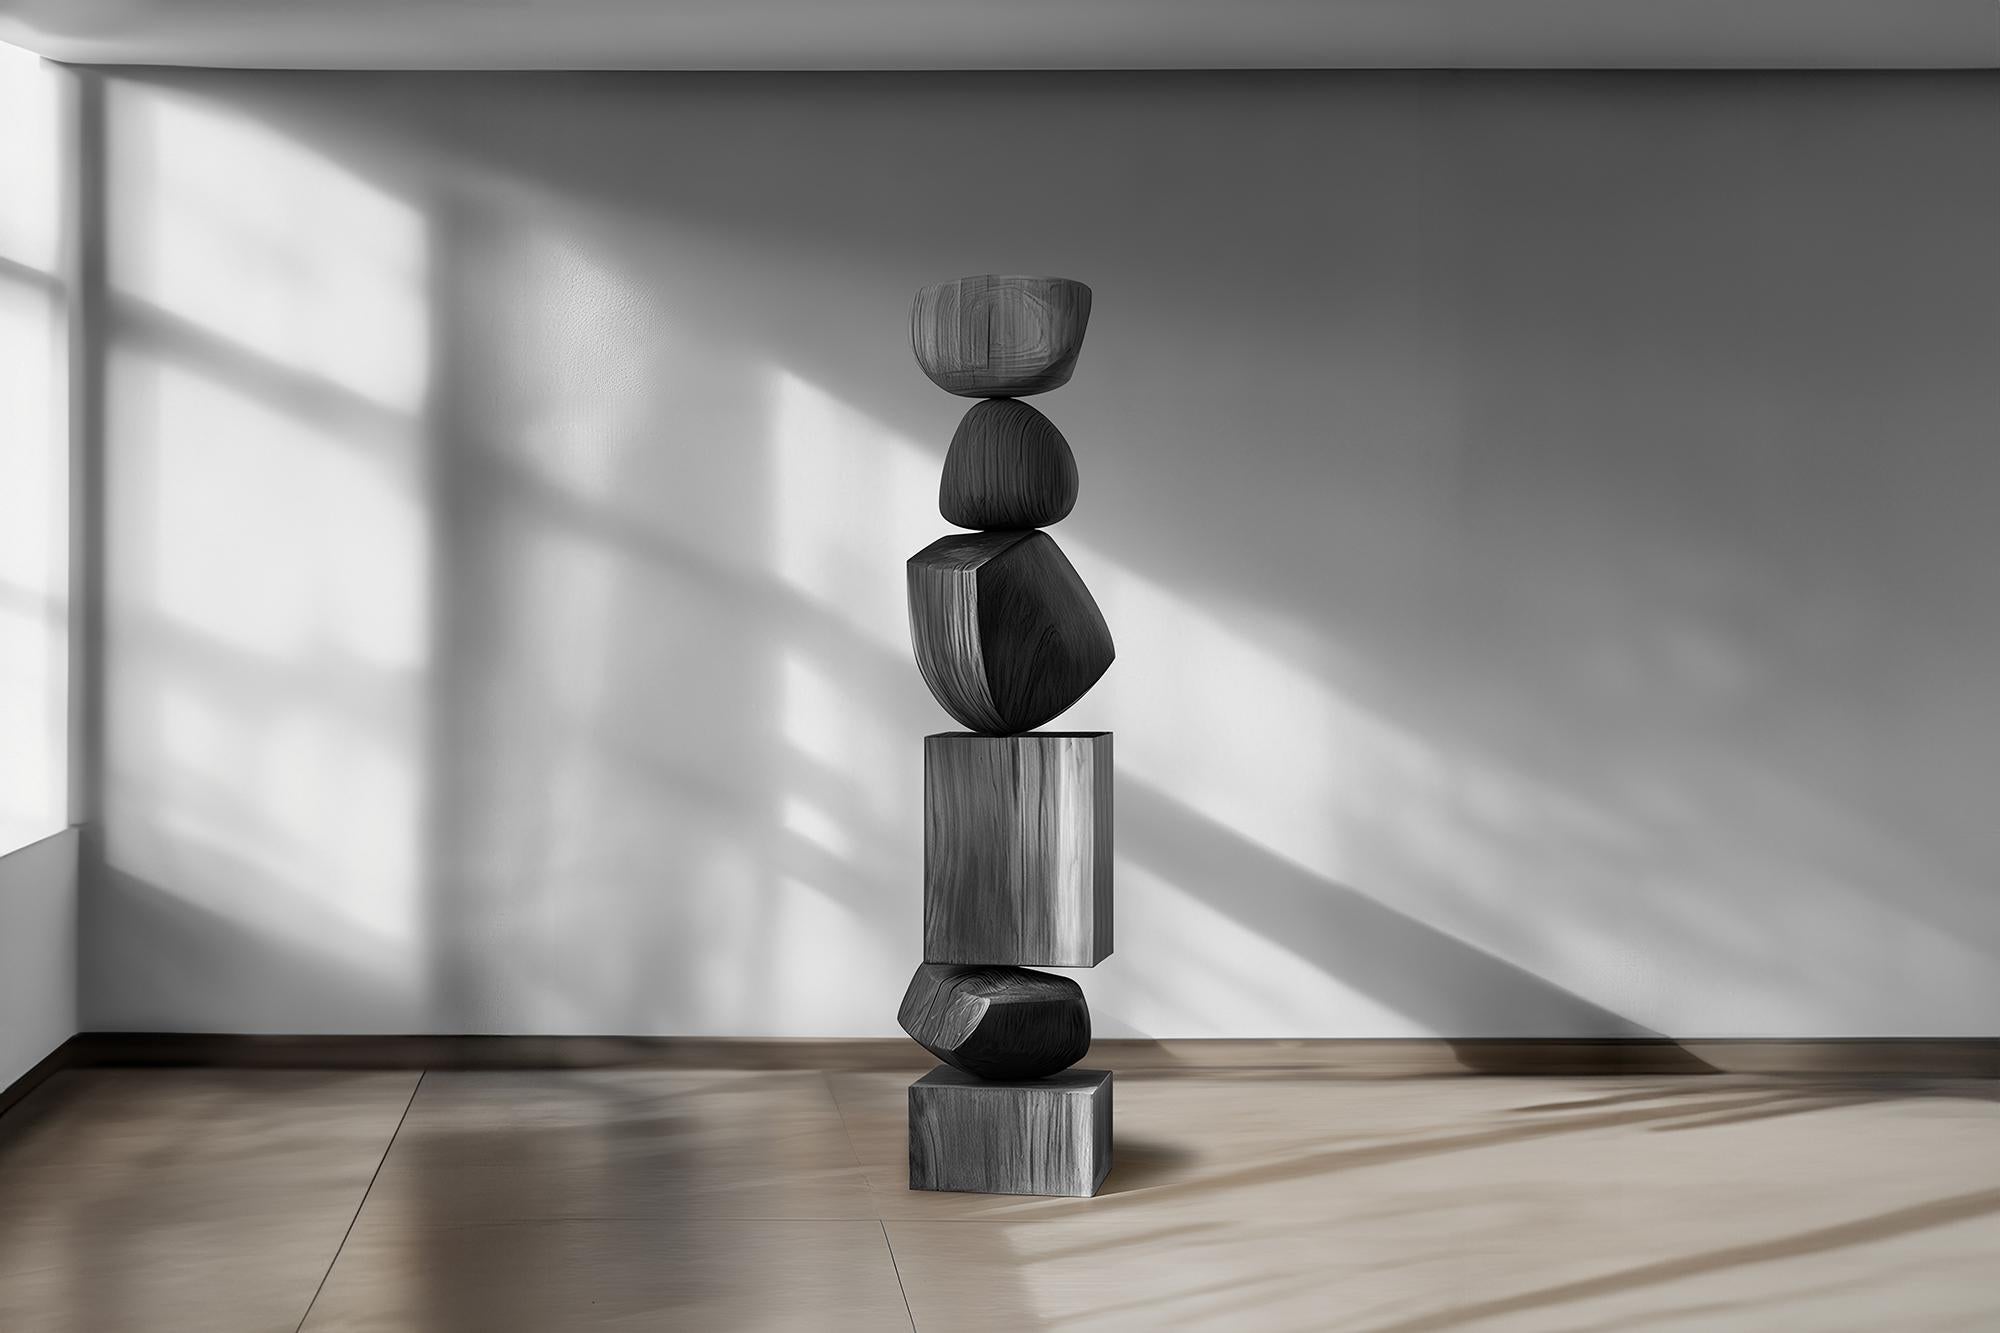 Design of Sleek Darkness, Modern Black Solid Wood Totem by NONO, Still Stand No101


——

Joel Escalona's wooden standing sculptures are objects of raw beauty and serene grace. Each one is a testament to the power of the material, with smooth curves